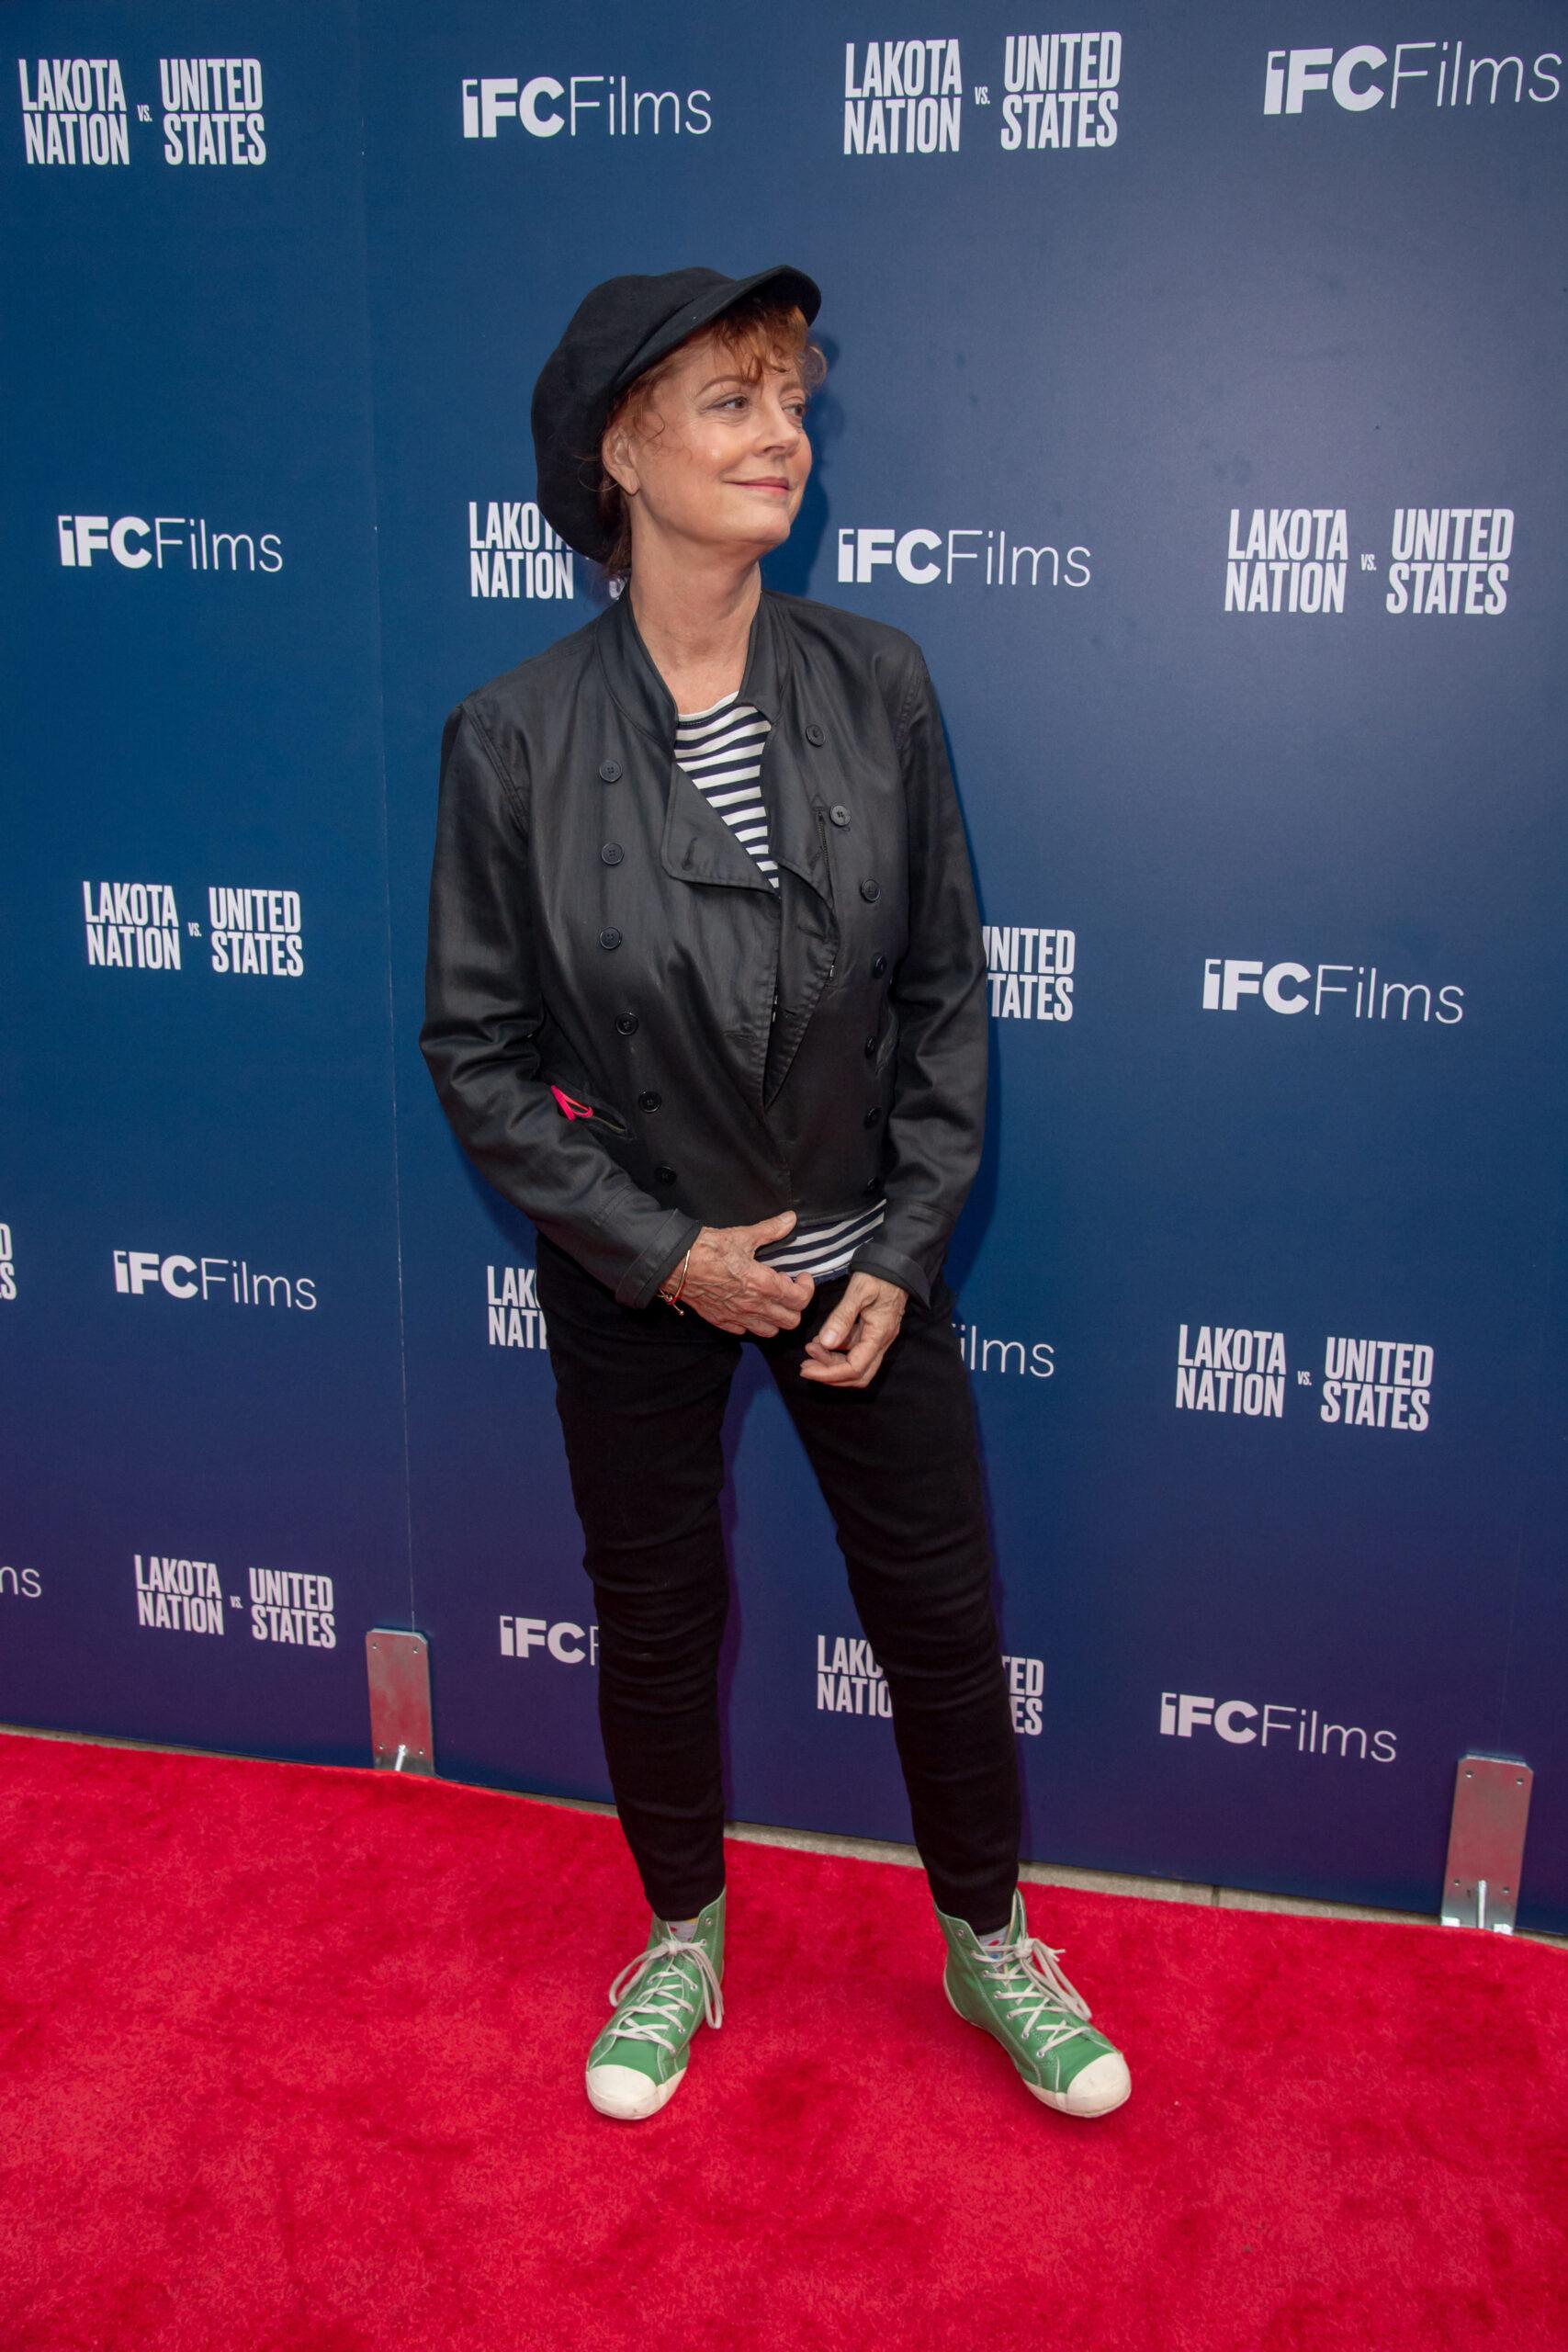 Susan Sarandon Dropped By Her Talent Agency Amid Pro-Palestine Support